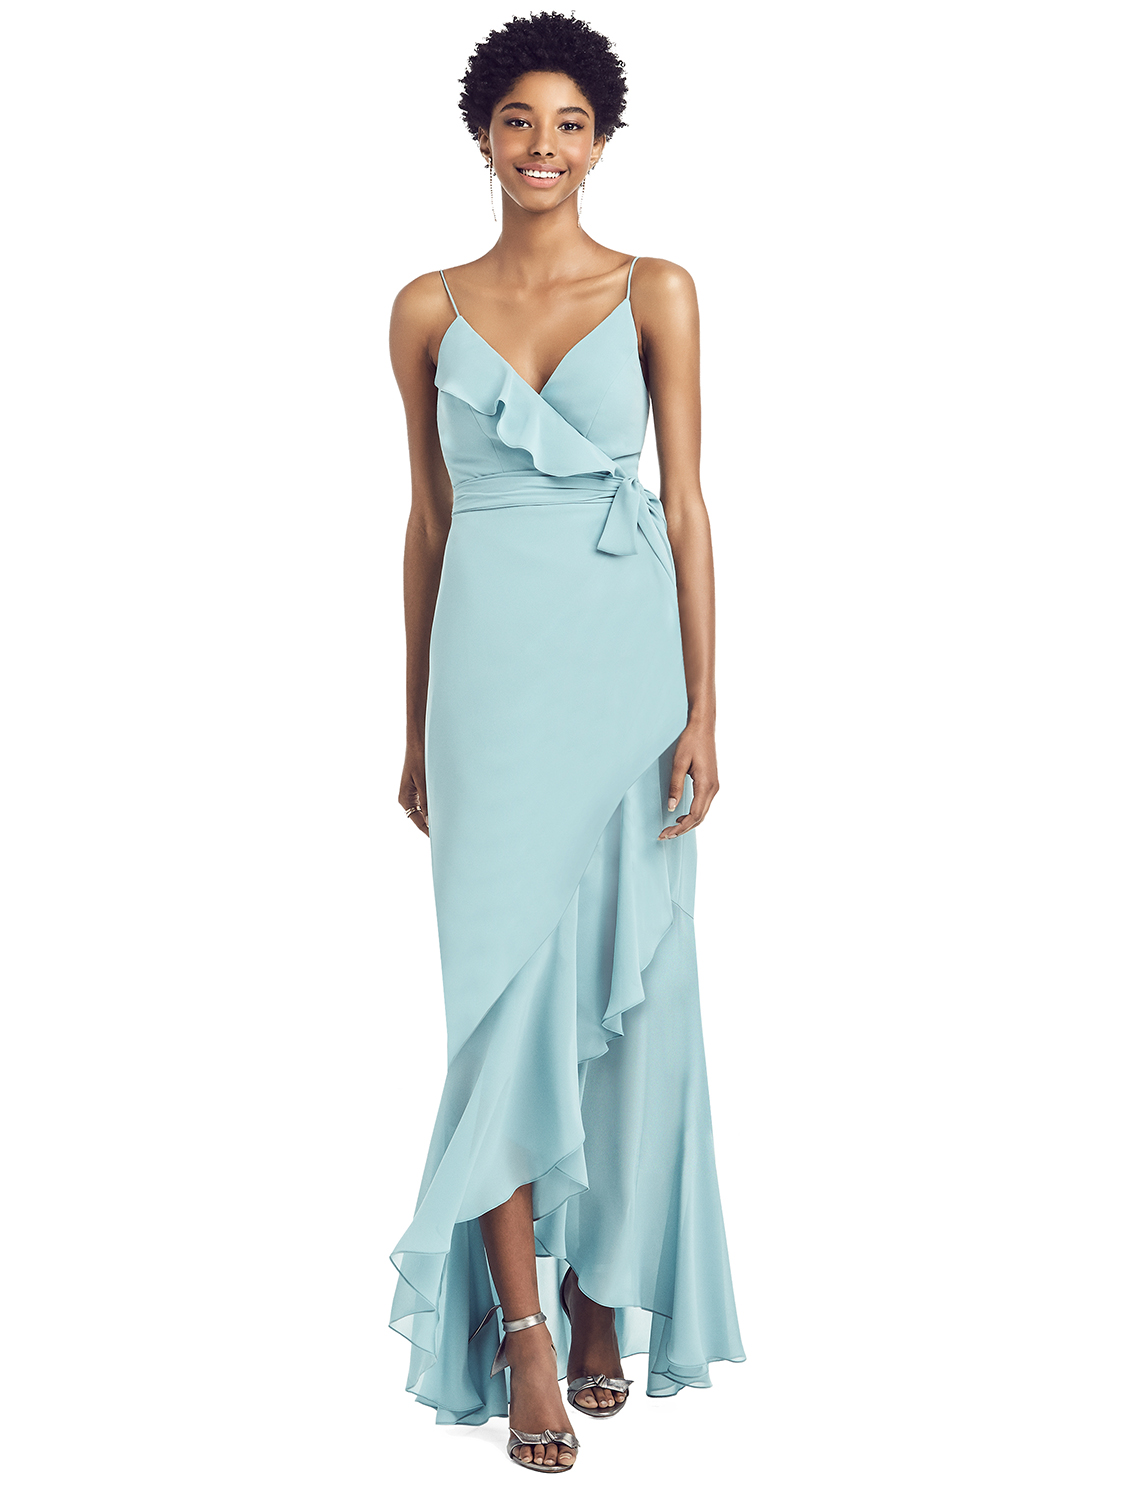 Dress - Social Bridesmaids SPRING 2020 - 8198 - Ruffled Wrap Dress with Spaghetti  Straps | SocialBridesmaids Evening Gown